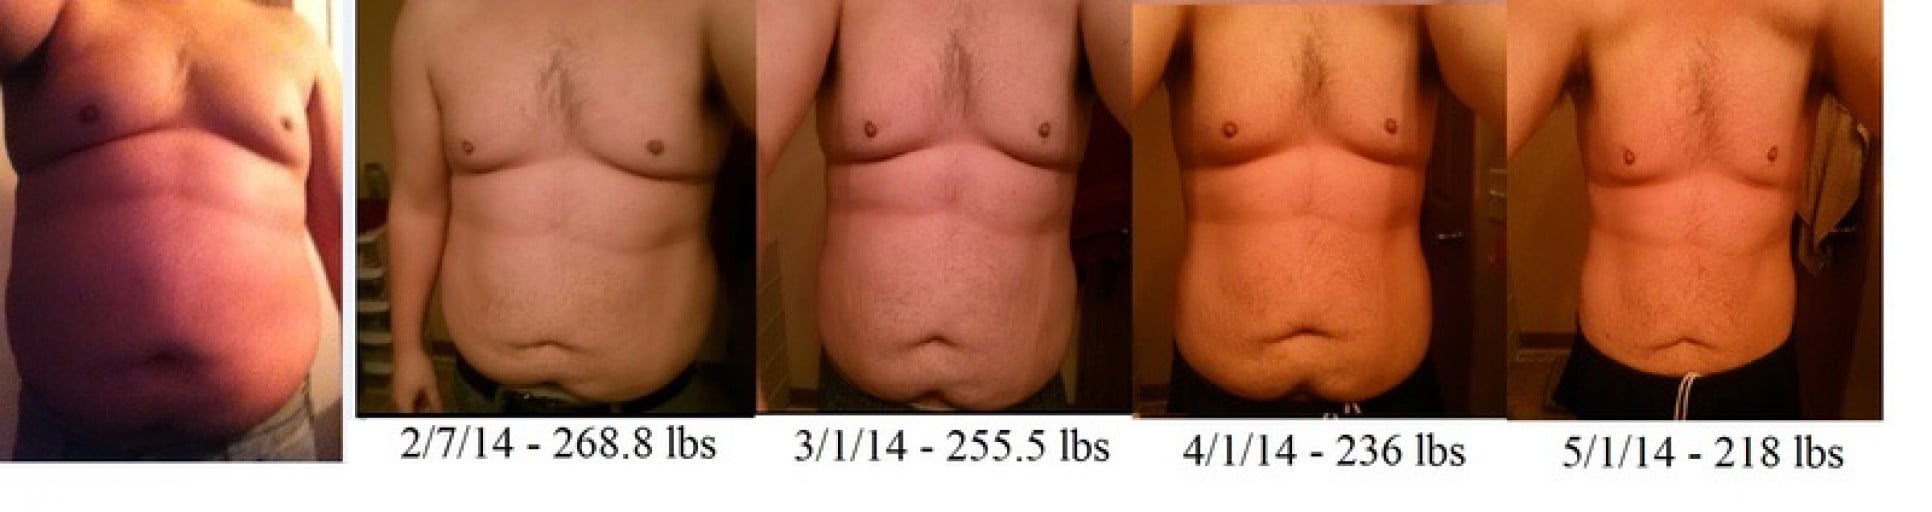 A picture of a 6'0" male showing a weight reduction from 310 pounds to 218 pounds. A net loss of 92 pounds.